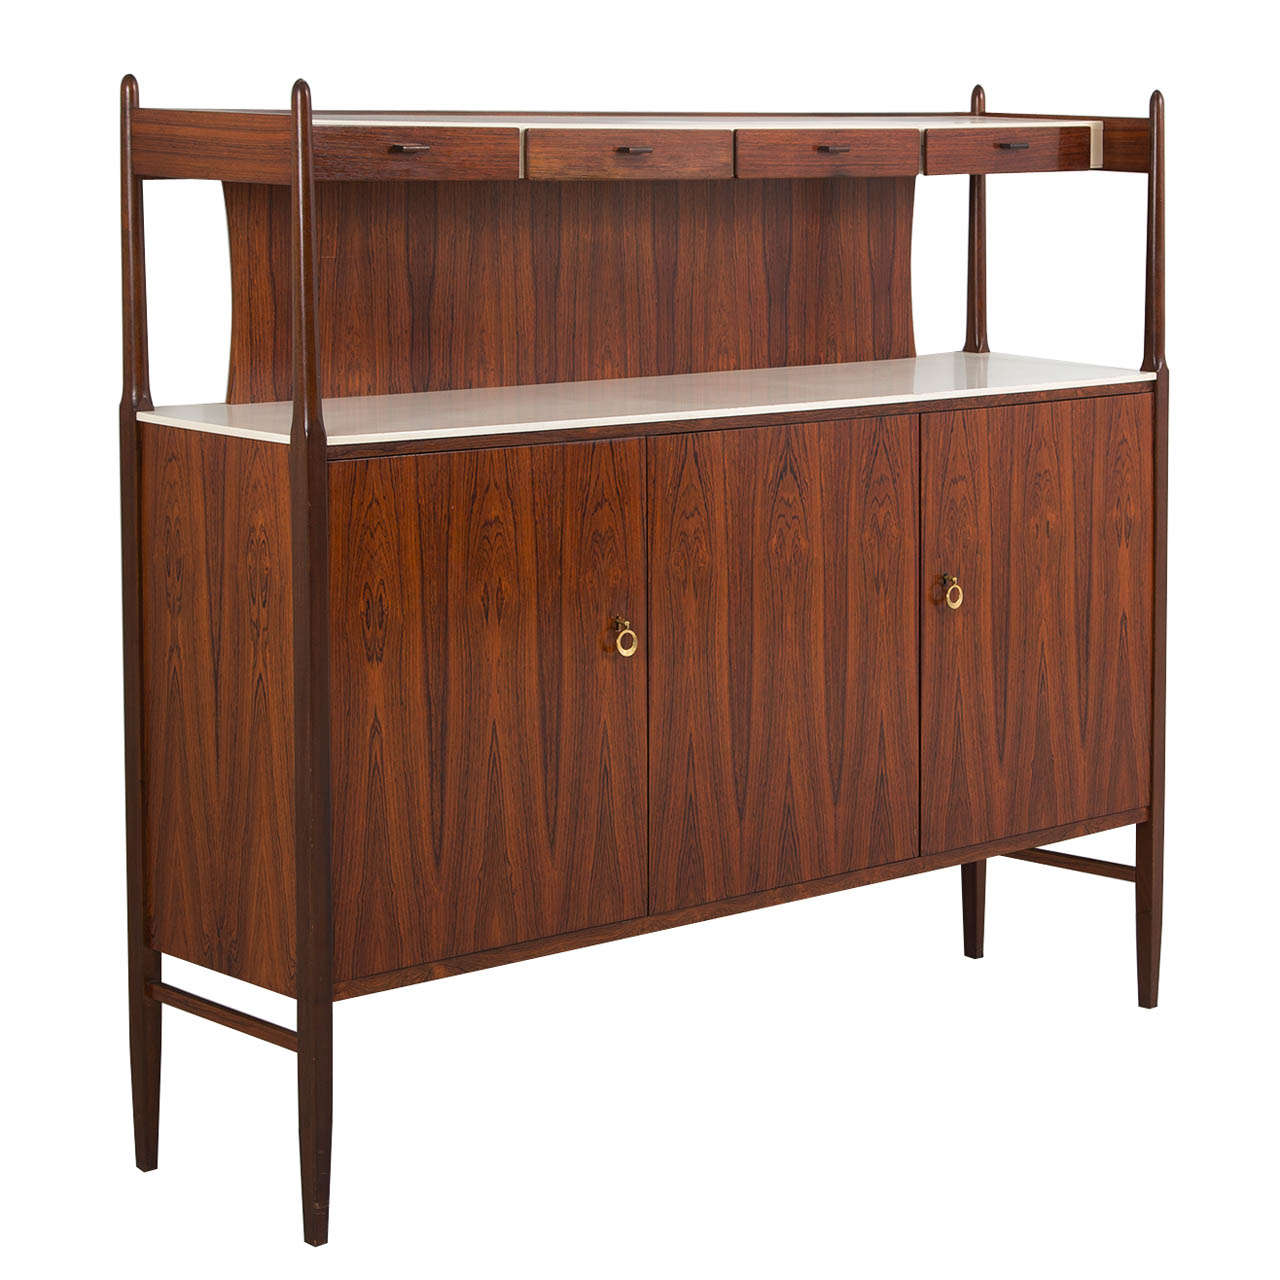 Danish Rosewood Highboard with Brass Details